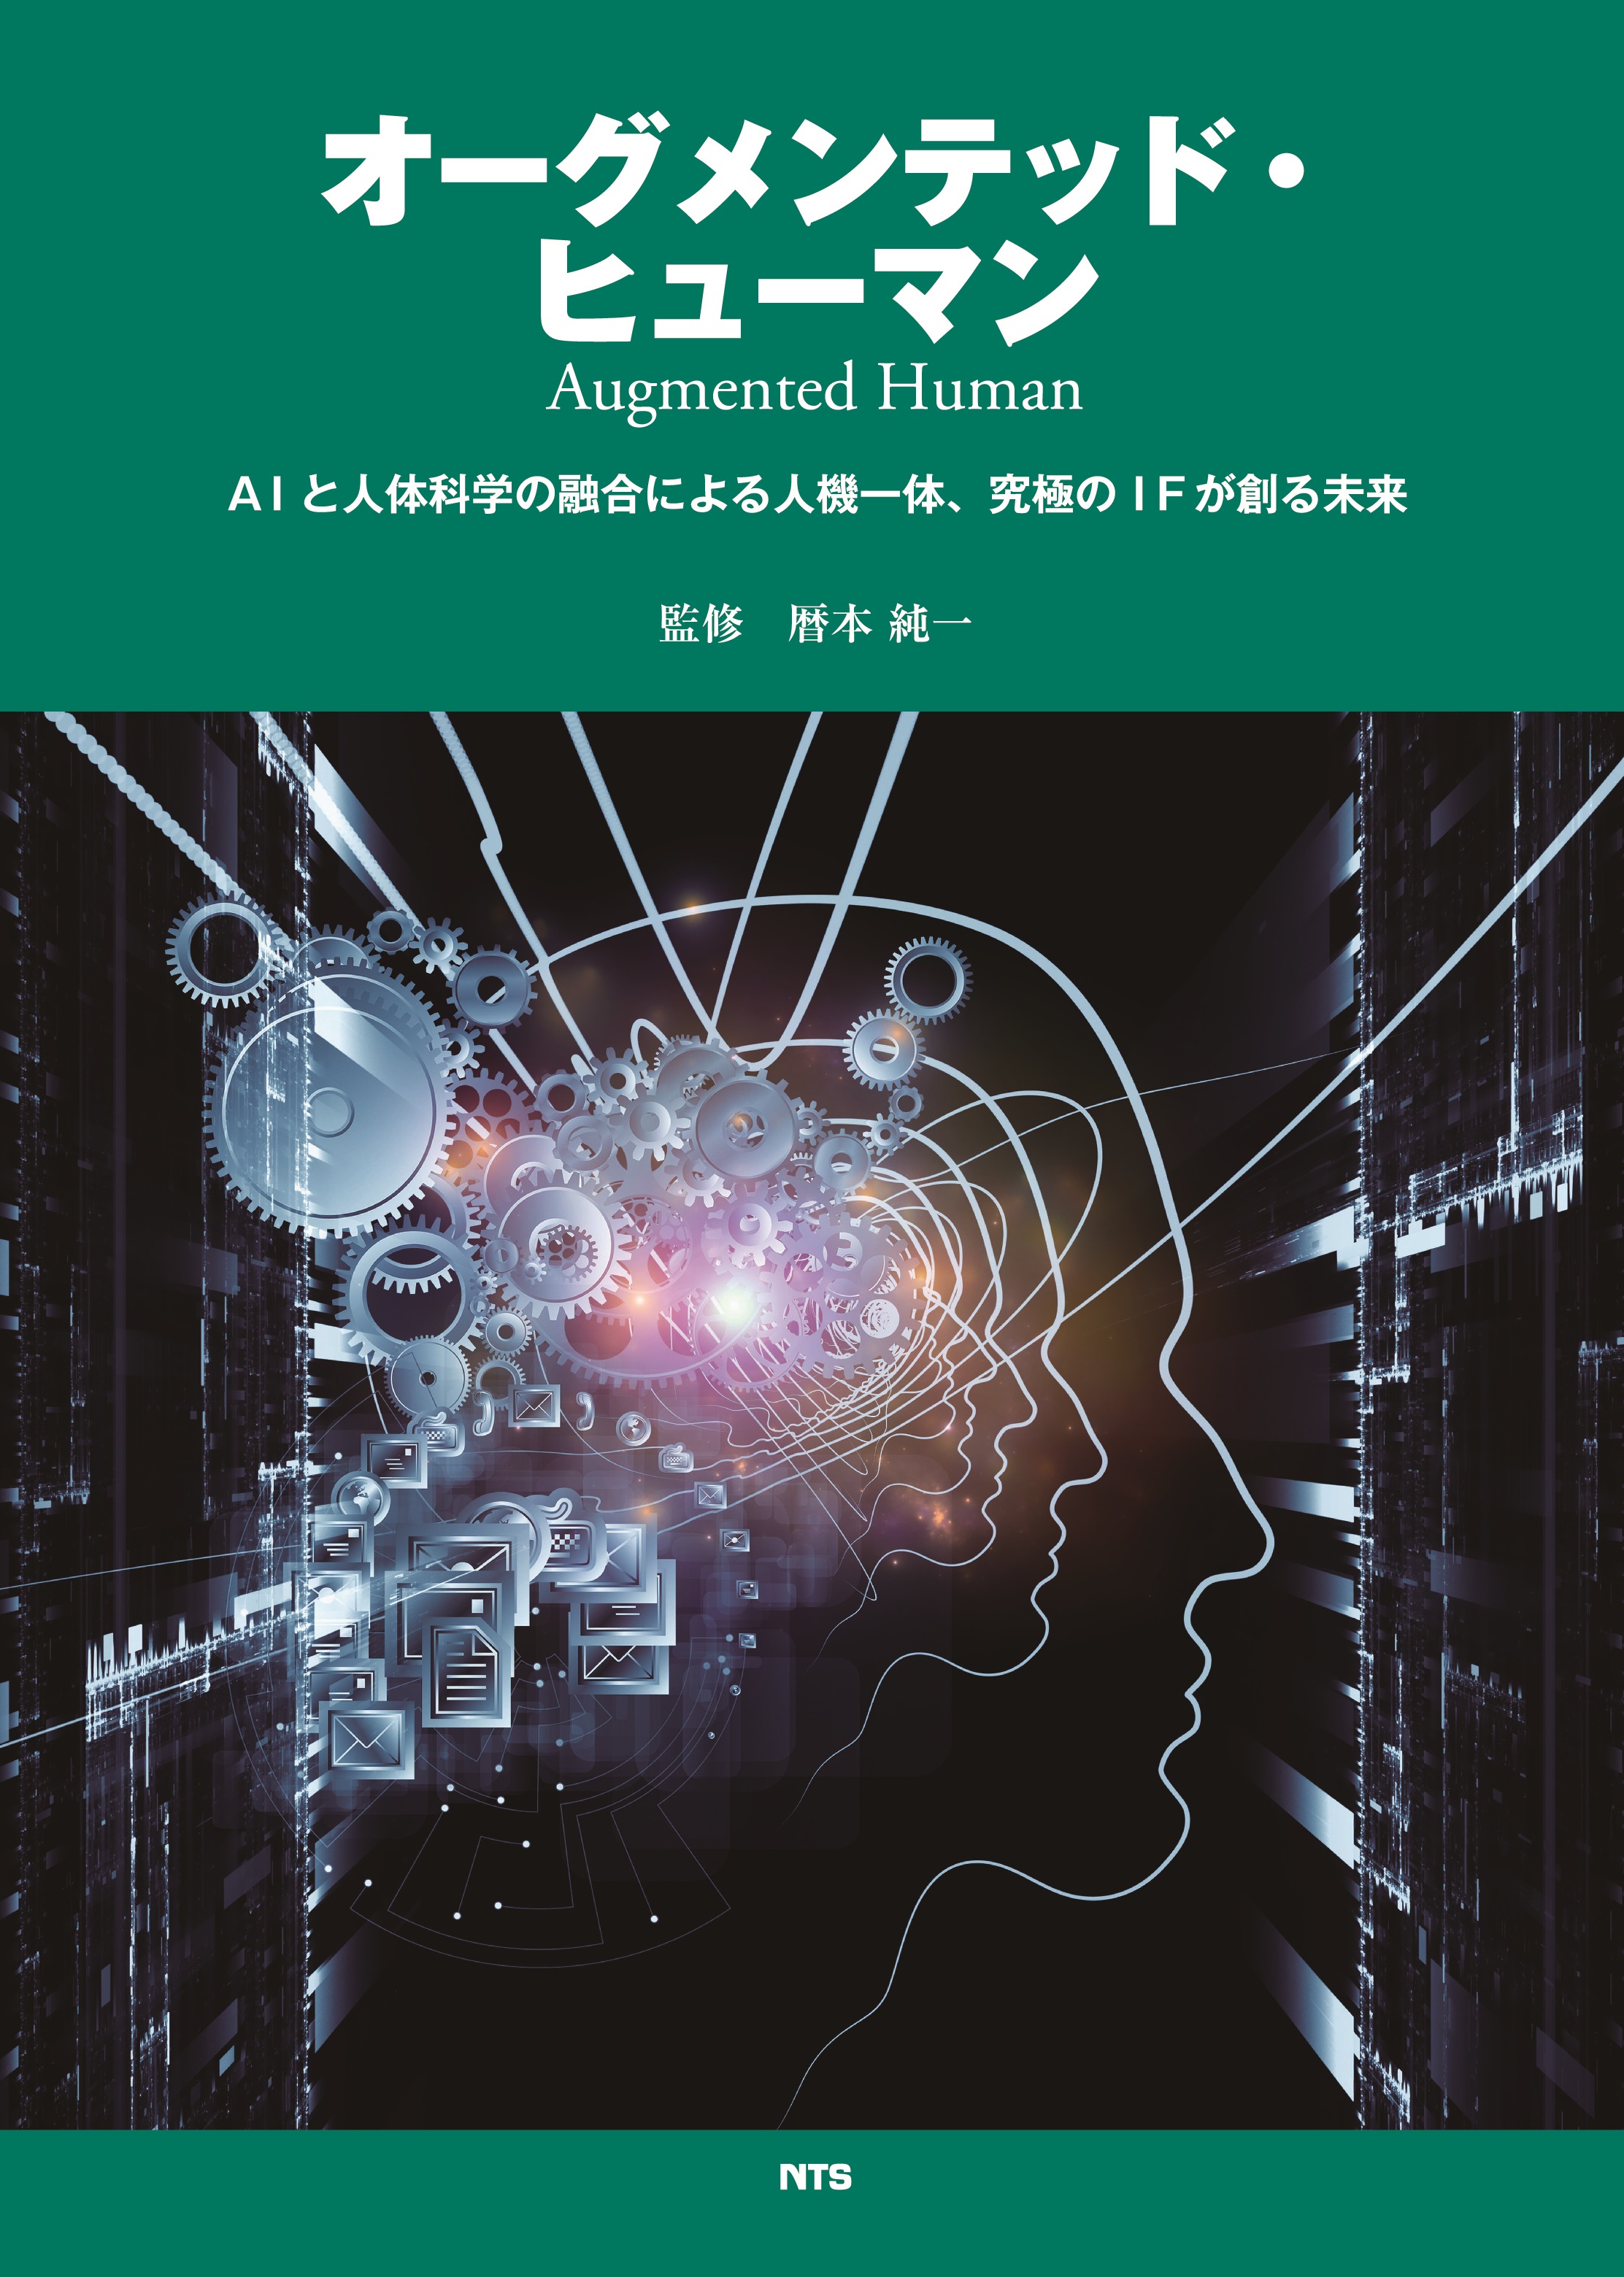 A green cover with AI image